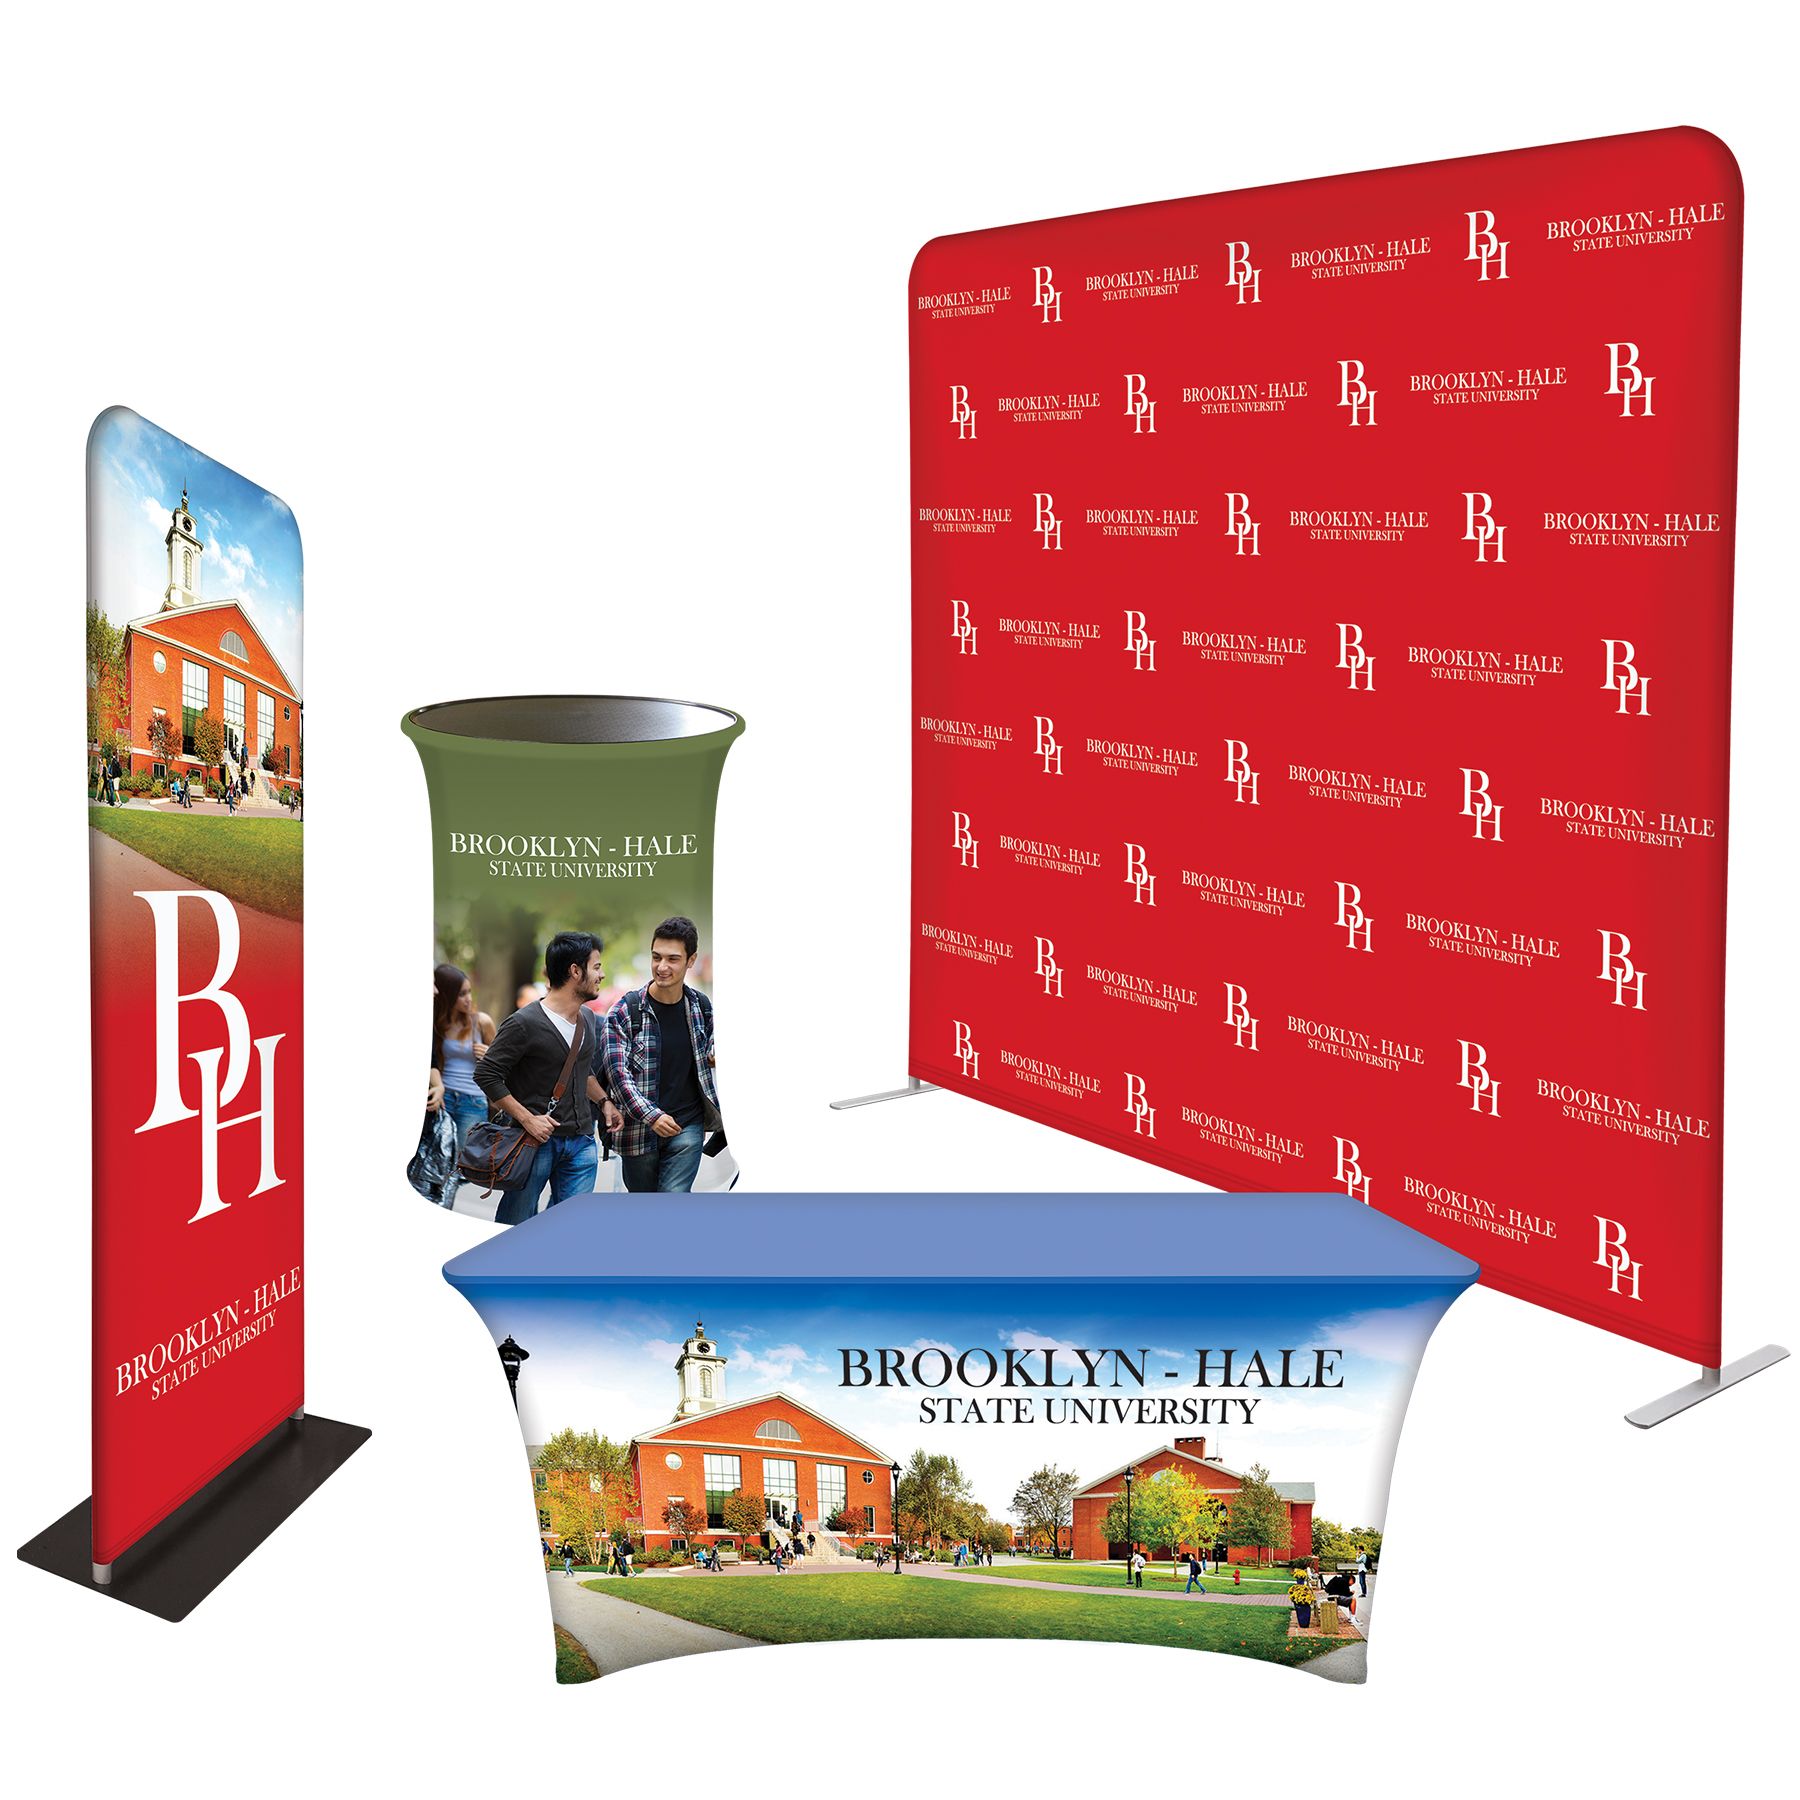 Trade Show Booth Display - Sleek Starter Package - Banners, Displays, Table Covers